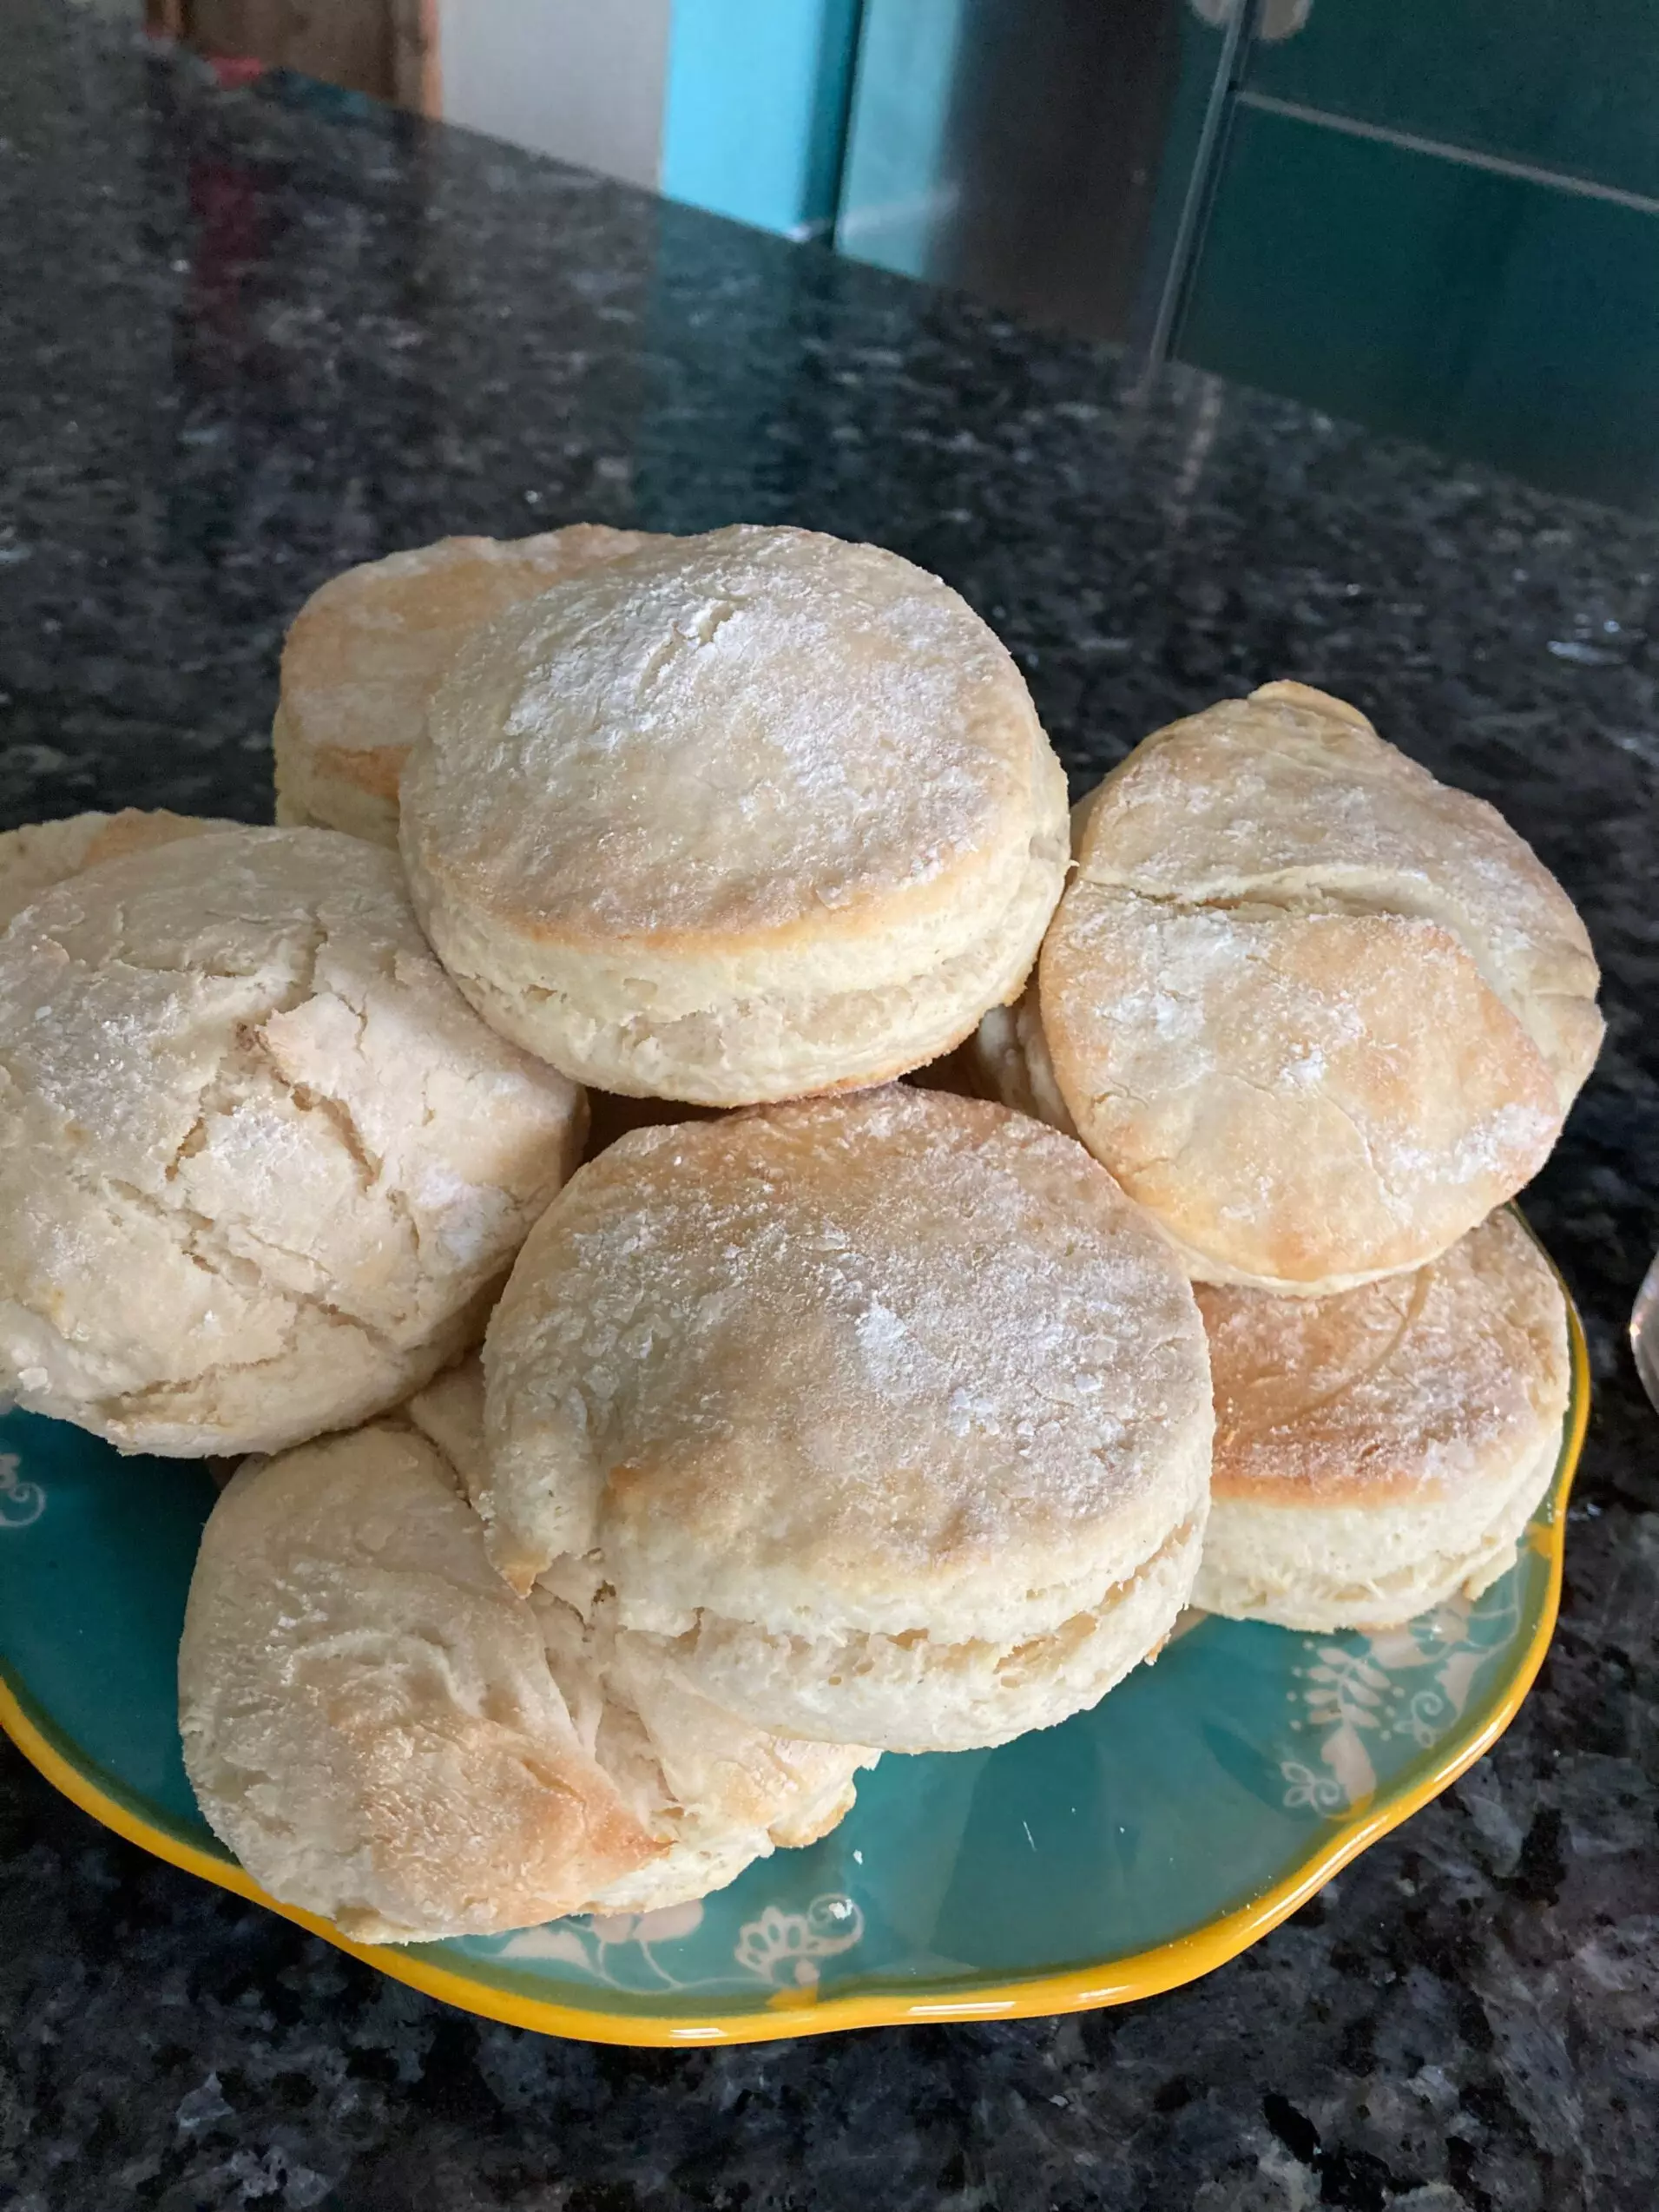 Baking Powder Biscuits from Out of the Box Baking.com